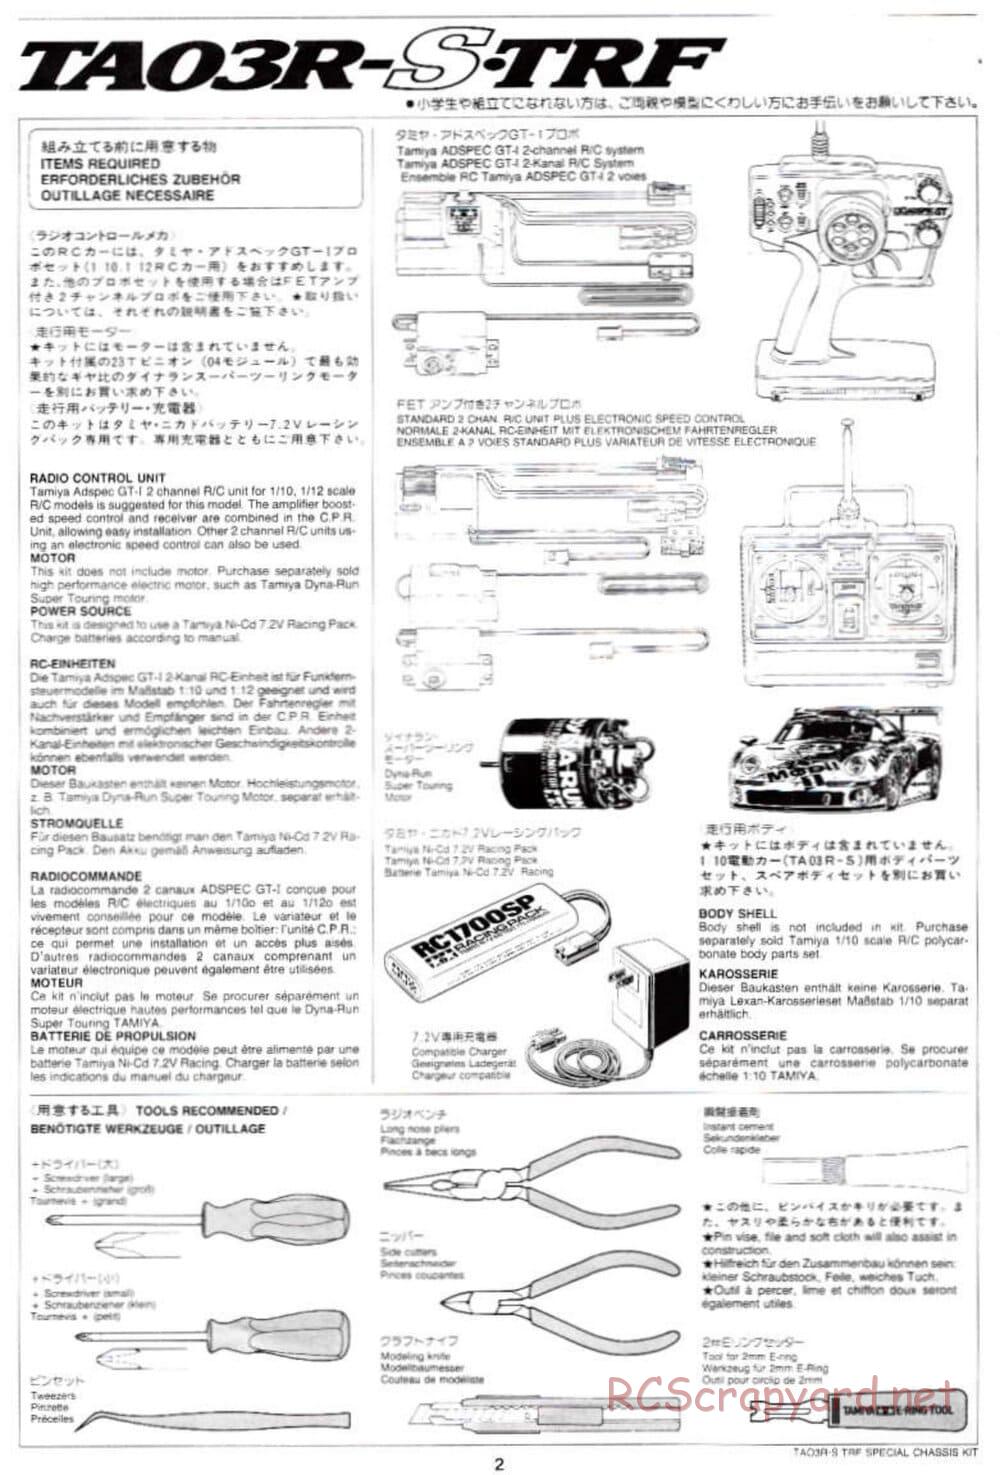 Tamiya - TA-03RS TRF Special Chassis - Manual - Page 2